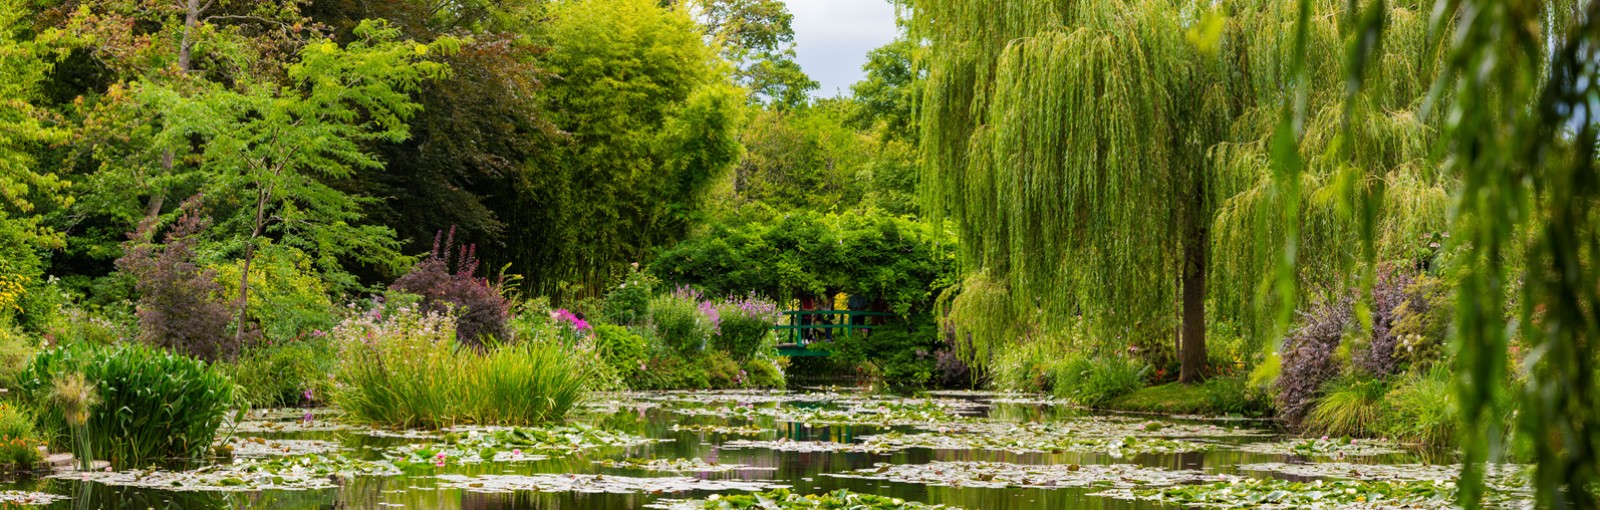 Tours Giverny - Half days - Day tours from Paris